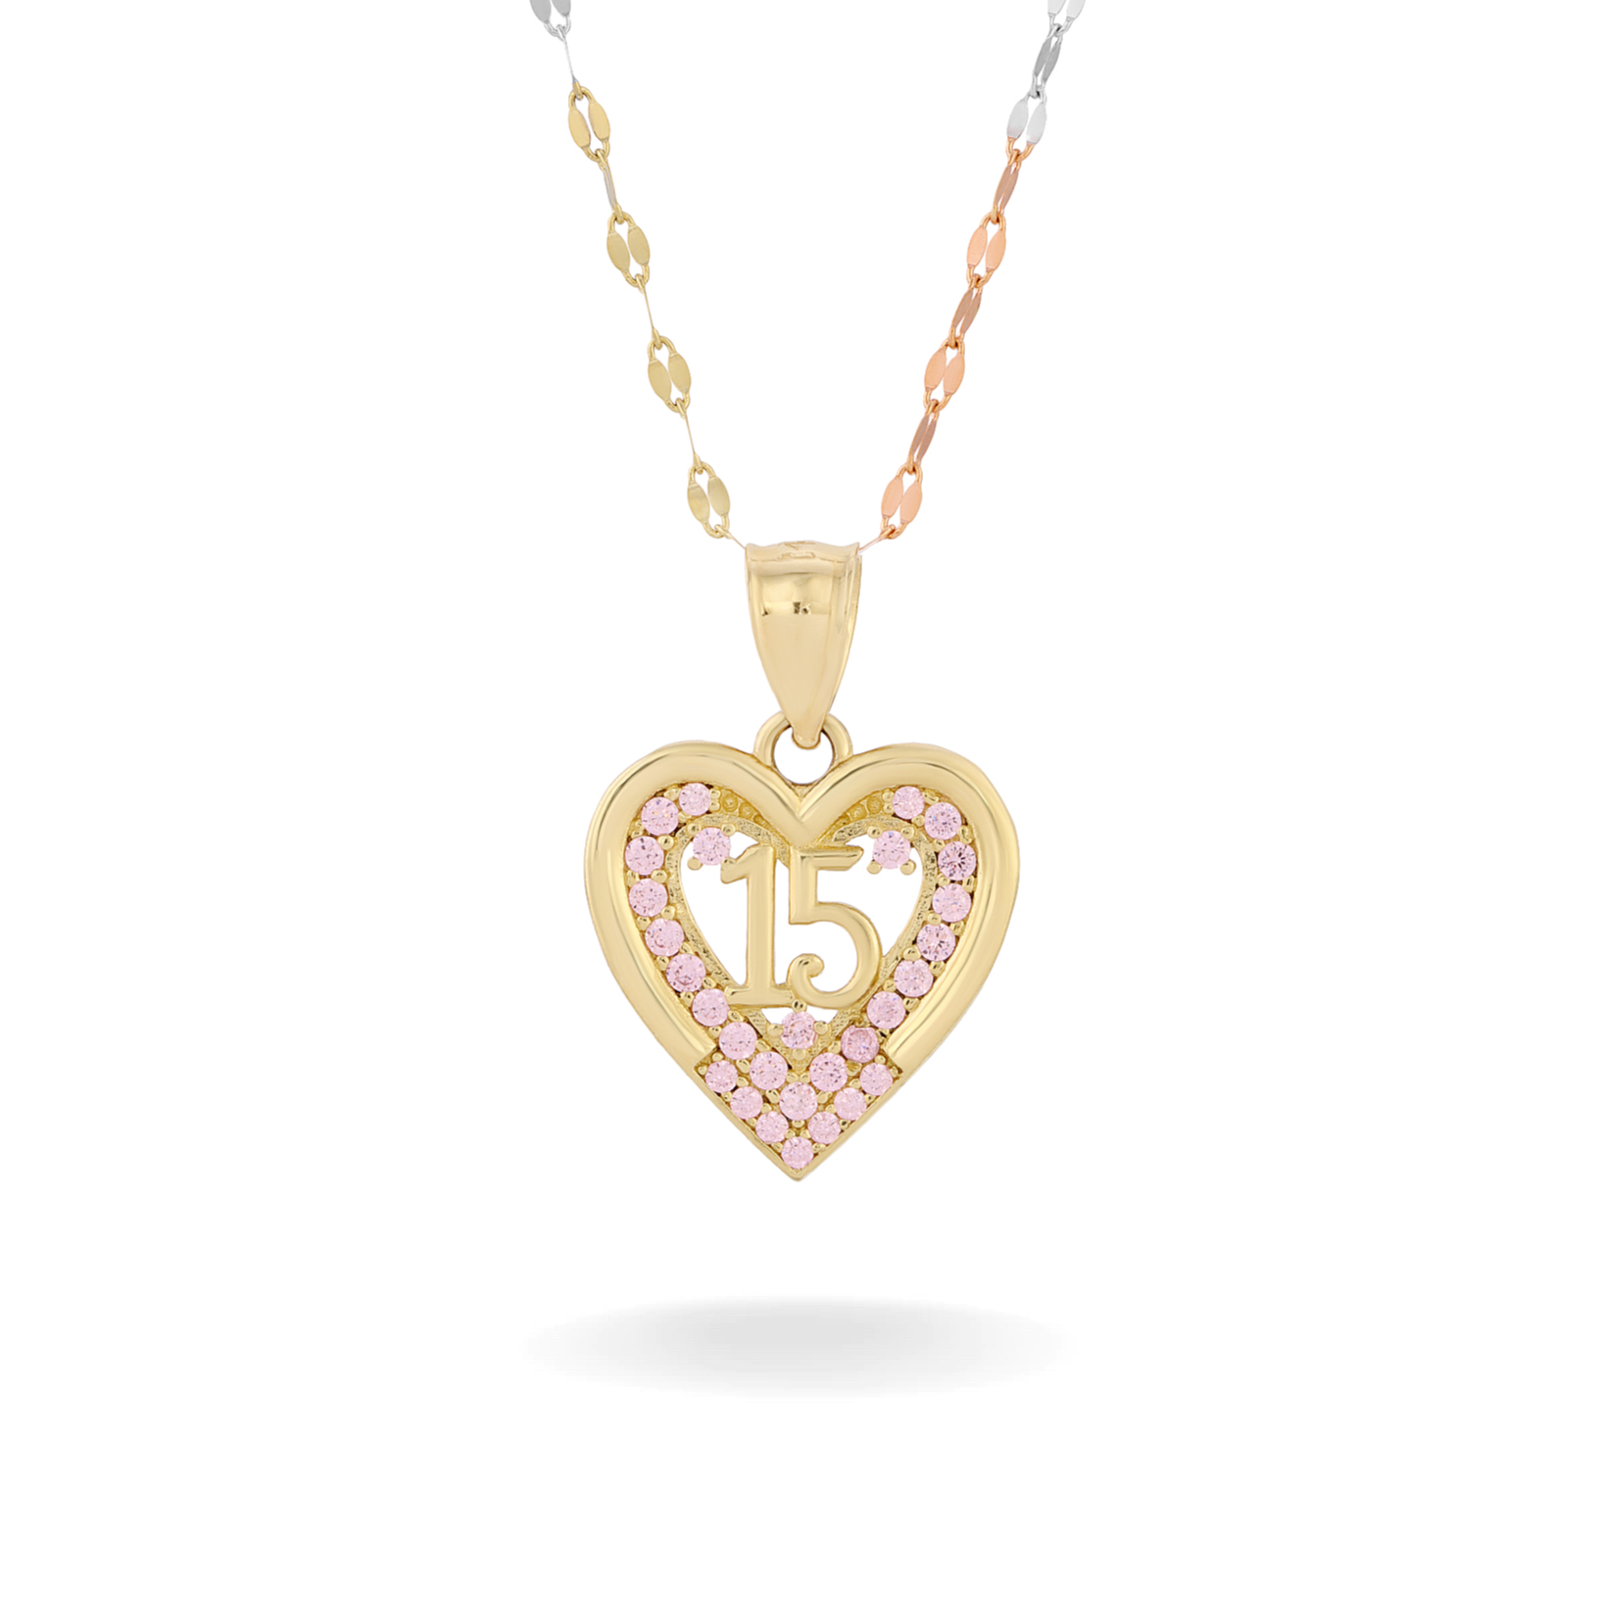 14K YELLOW GOLD PINK PAVE SWEET LOVE 15 NECKLACE